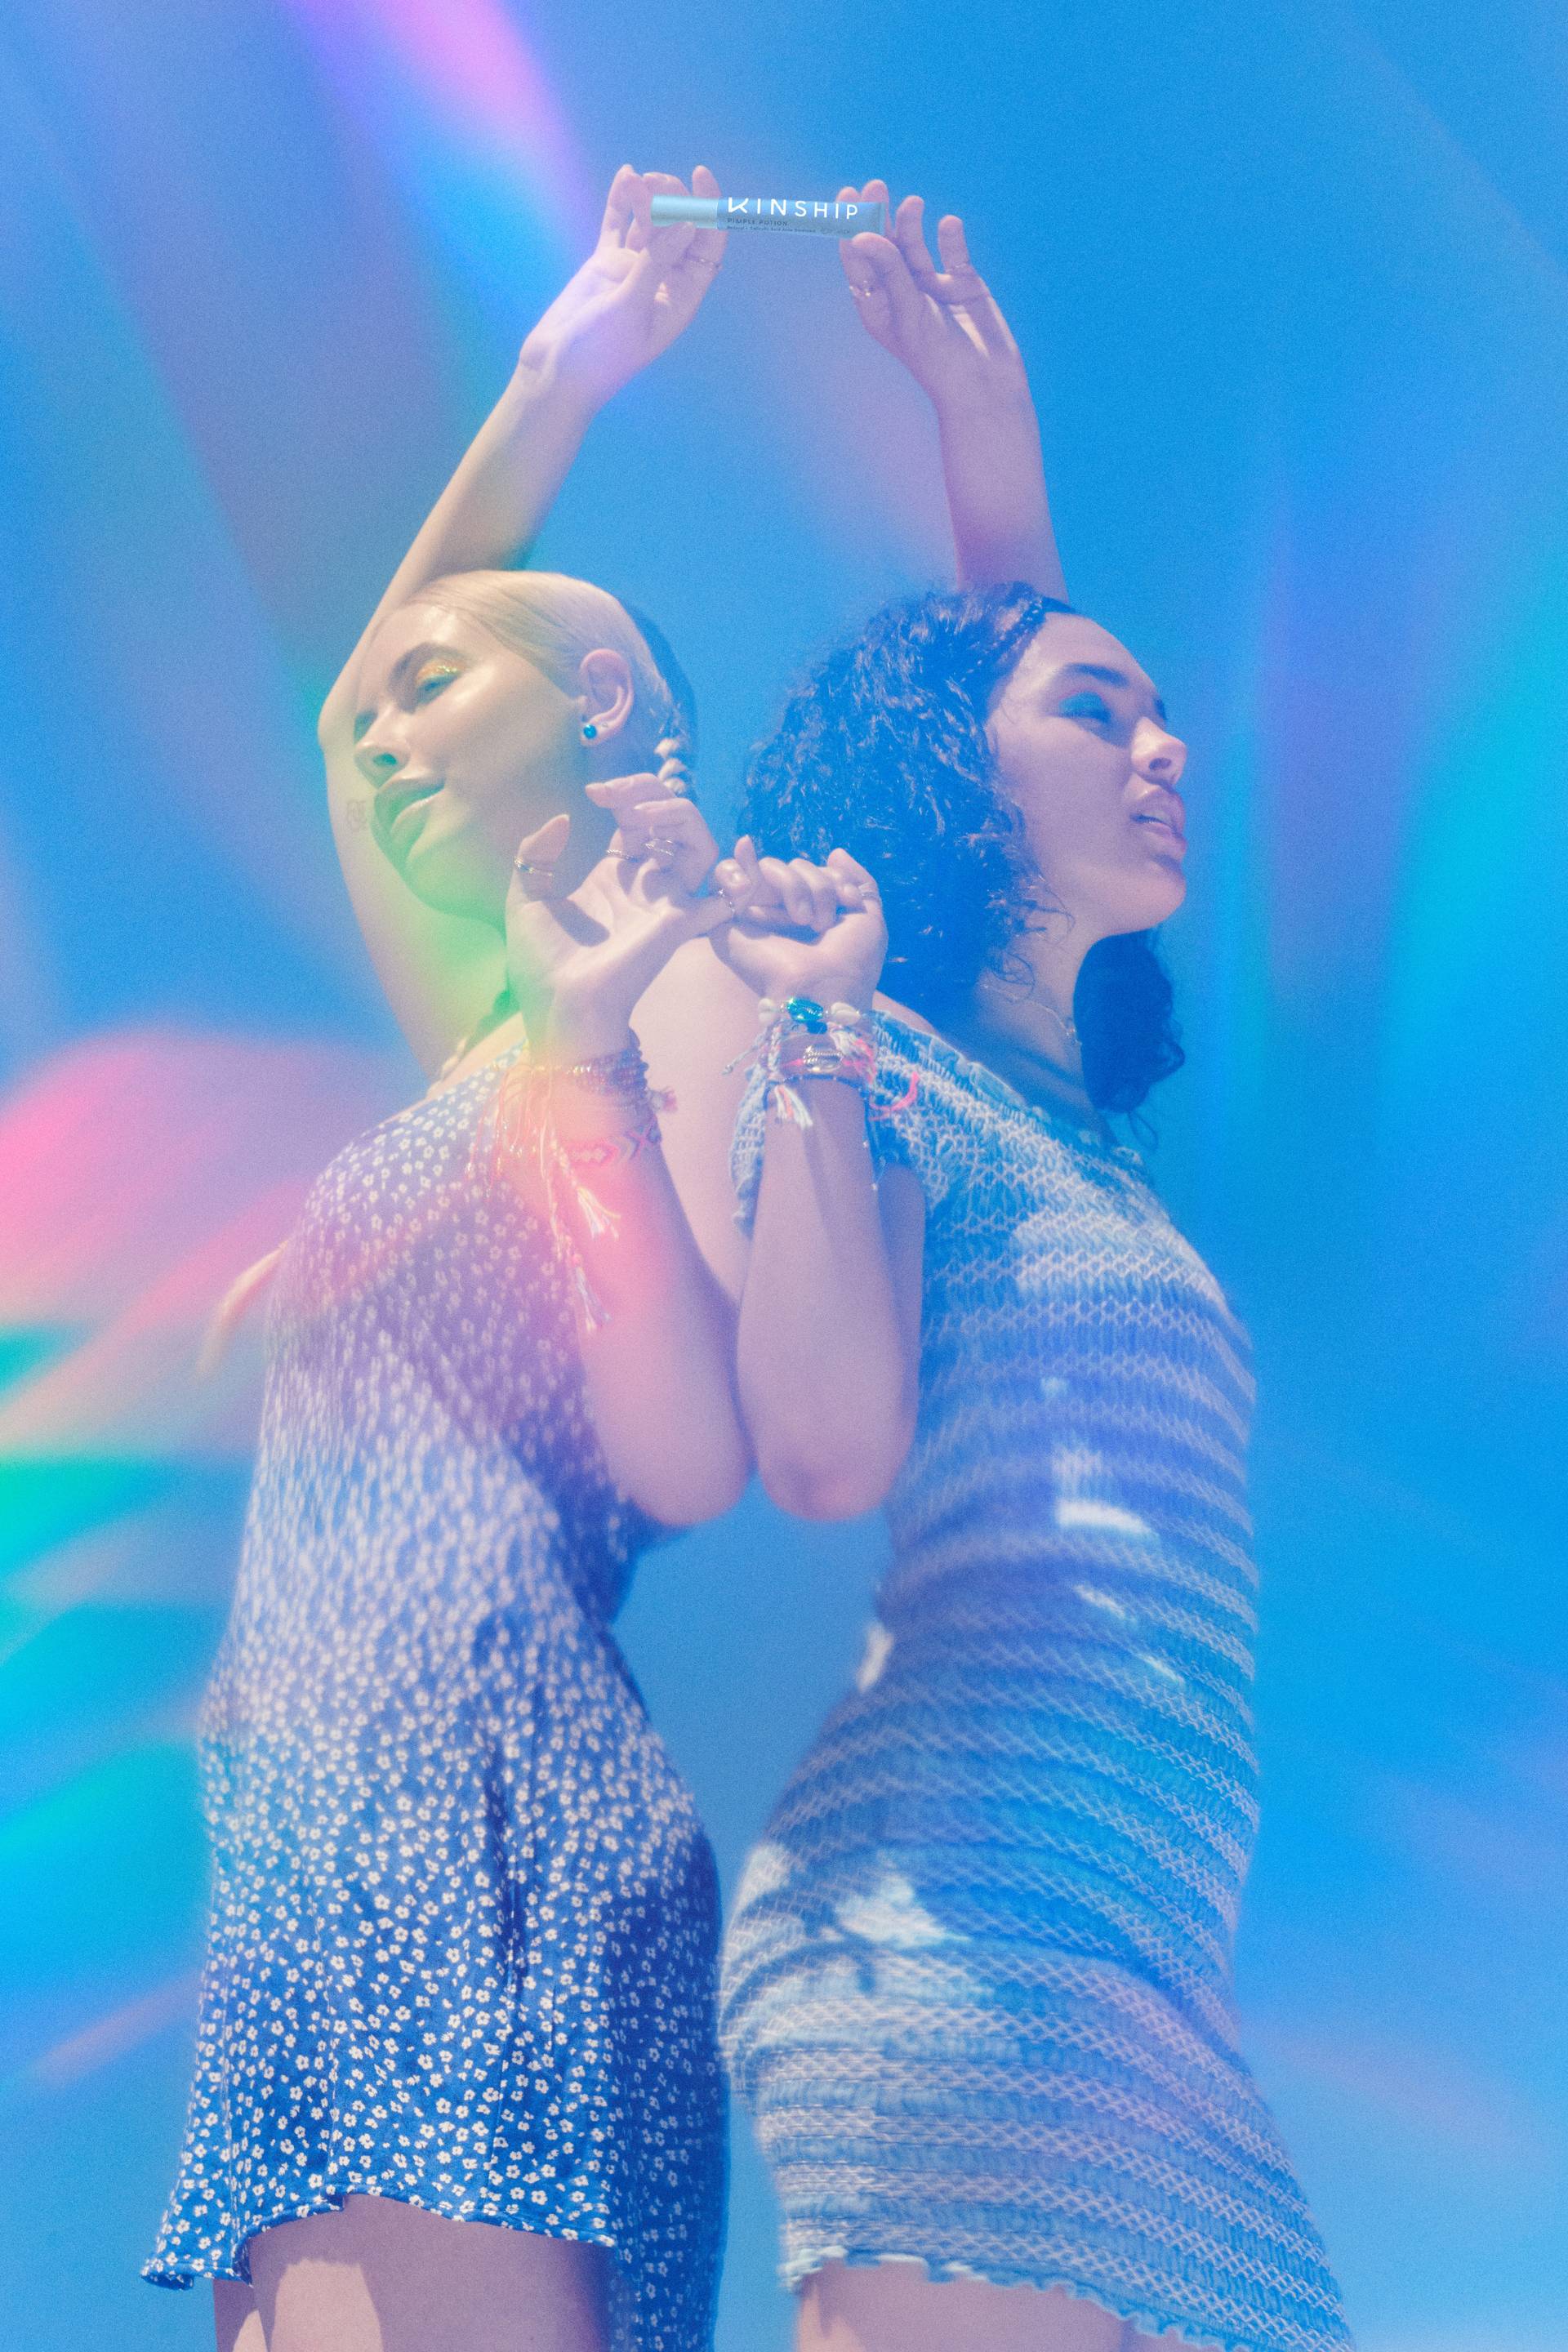 Two friends hold hands outdoors, cast in a rainbow prism of light | Kinship